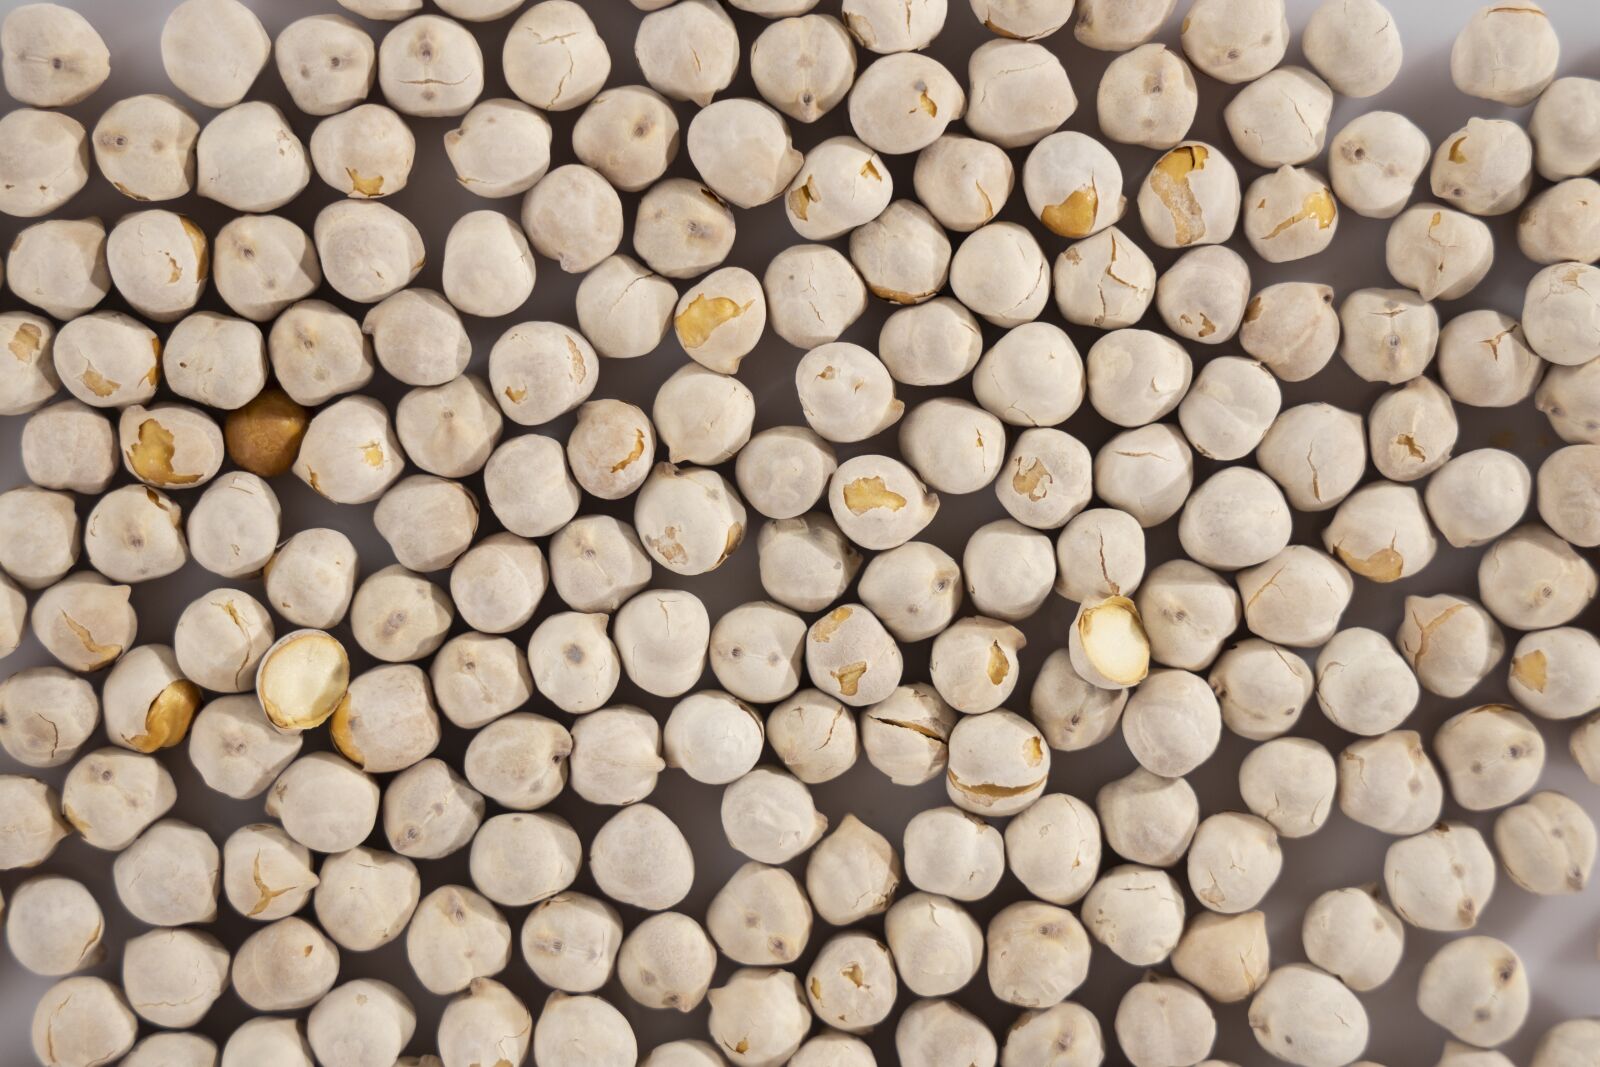 Canon EOS R sample photo. Chickpeas, dried fruits and photography